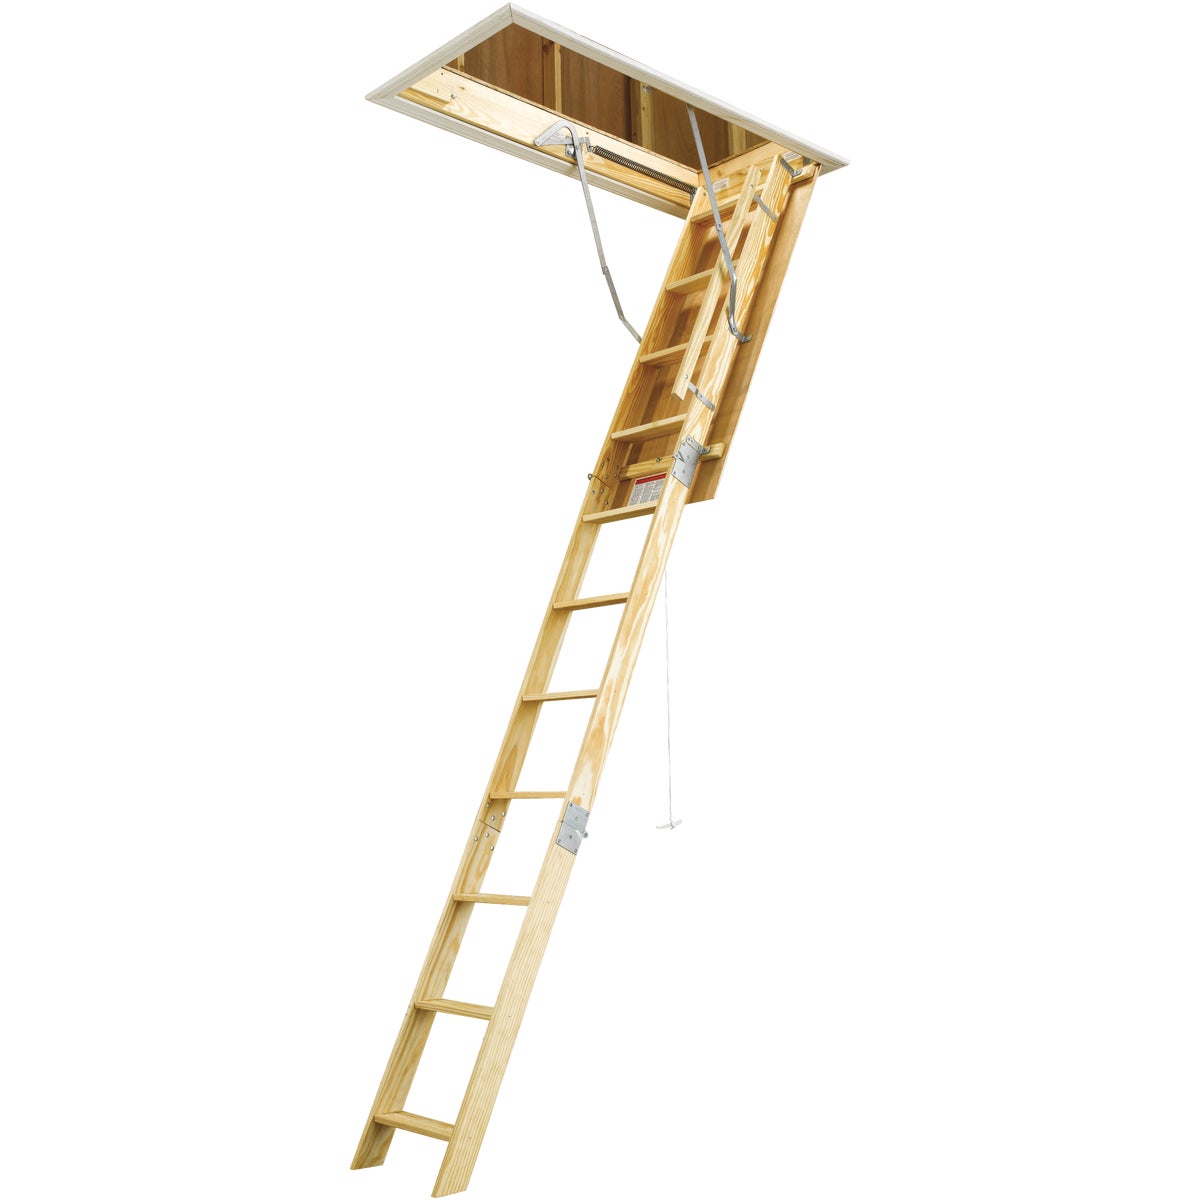 Werner W Series 8 Ft. 9 in. to 10 Ft. 4 In. 25 In. x 54 In. Wood Attic Ladder, 250 Lb. Load